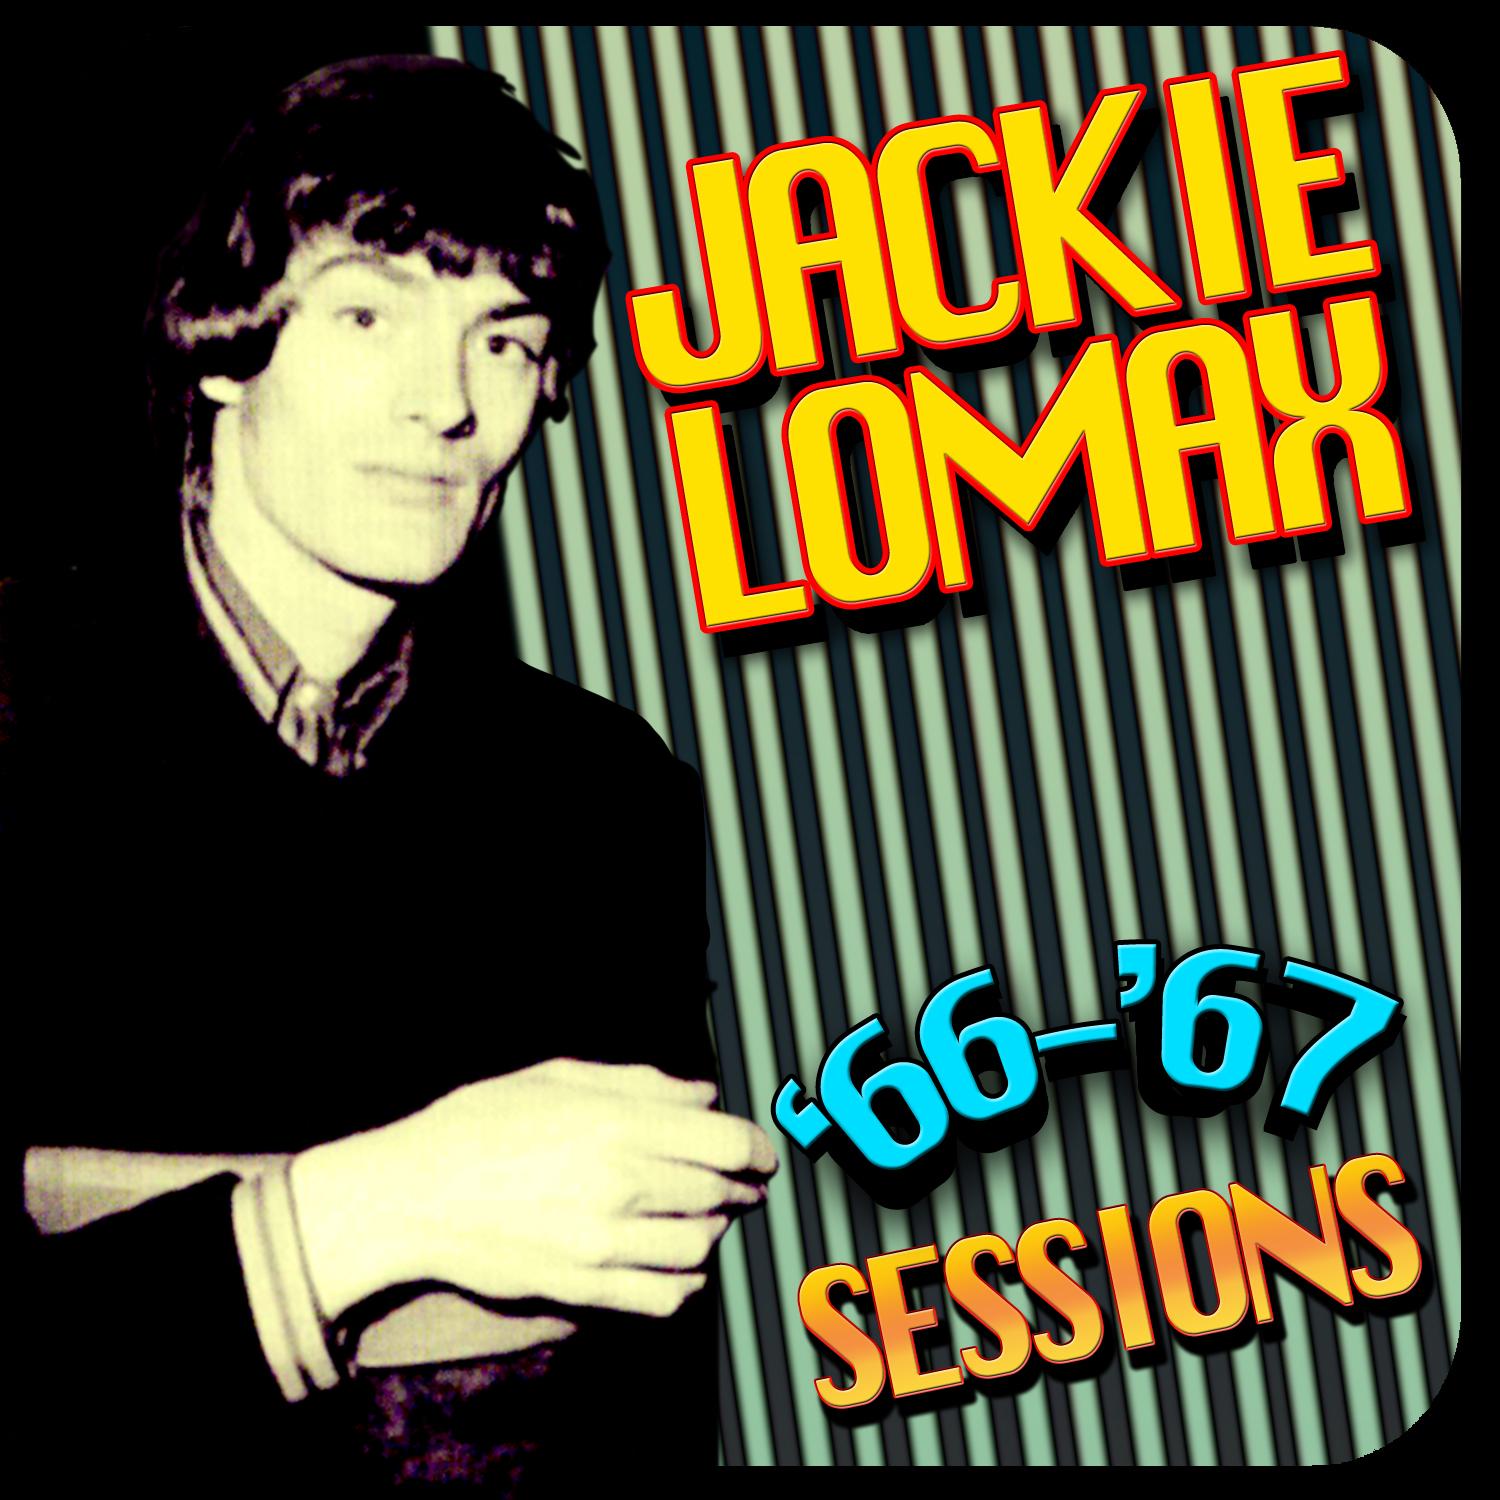 '66-'67 Sessions